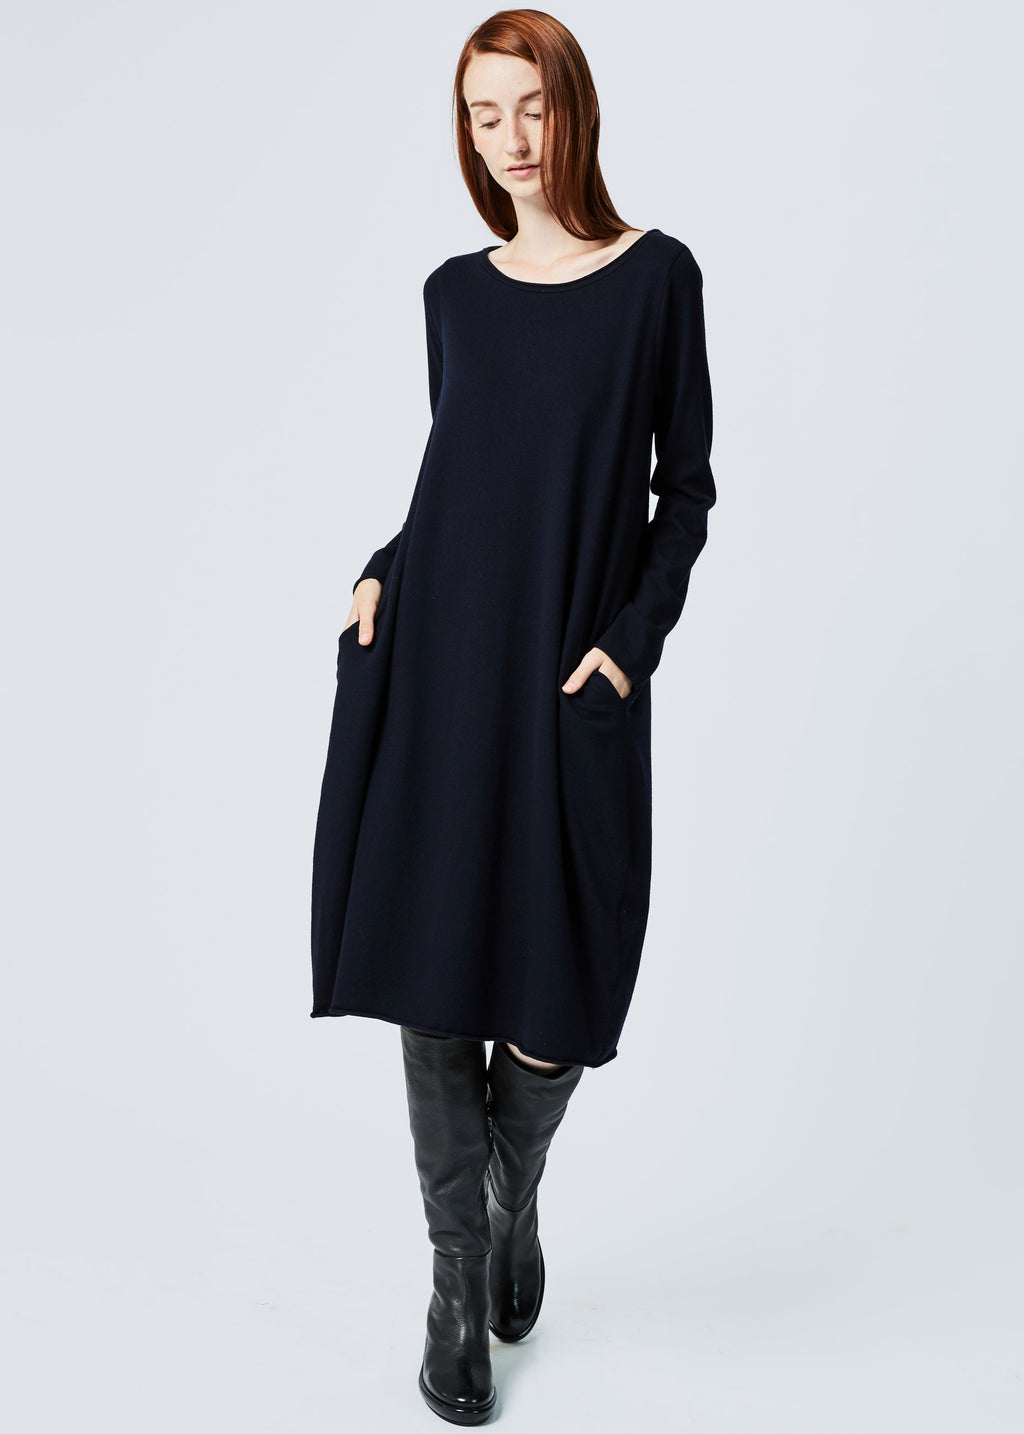 Shop Dresses by Curated Luxury Designers – Baby & Company